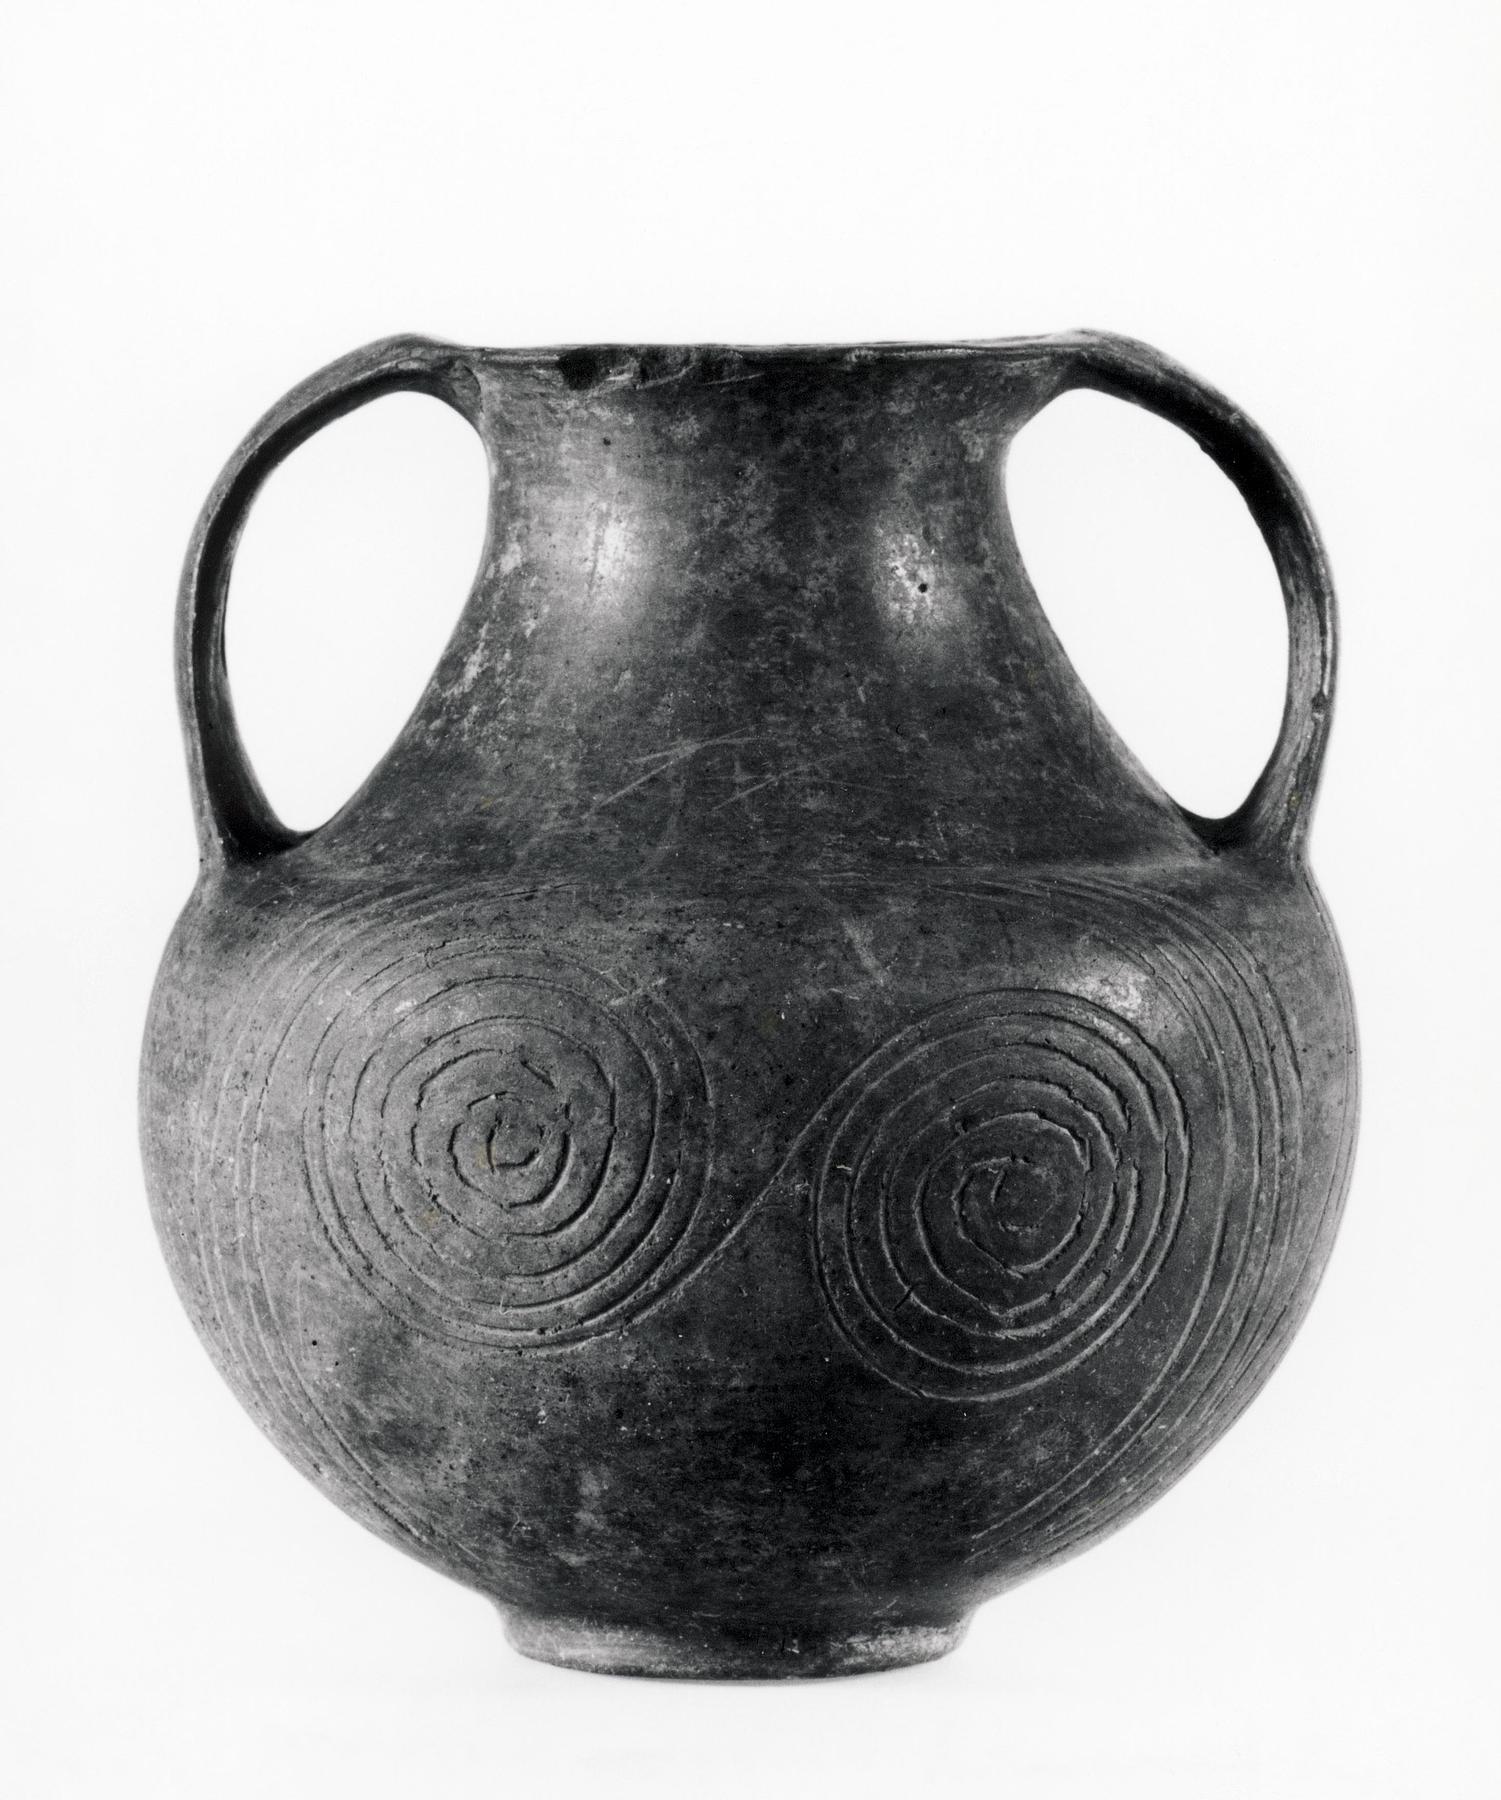 Amphora with spiral ornament, H782